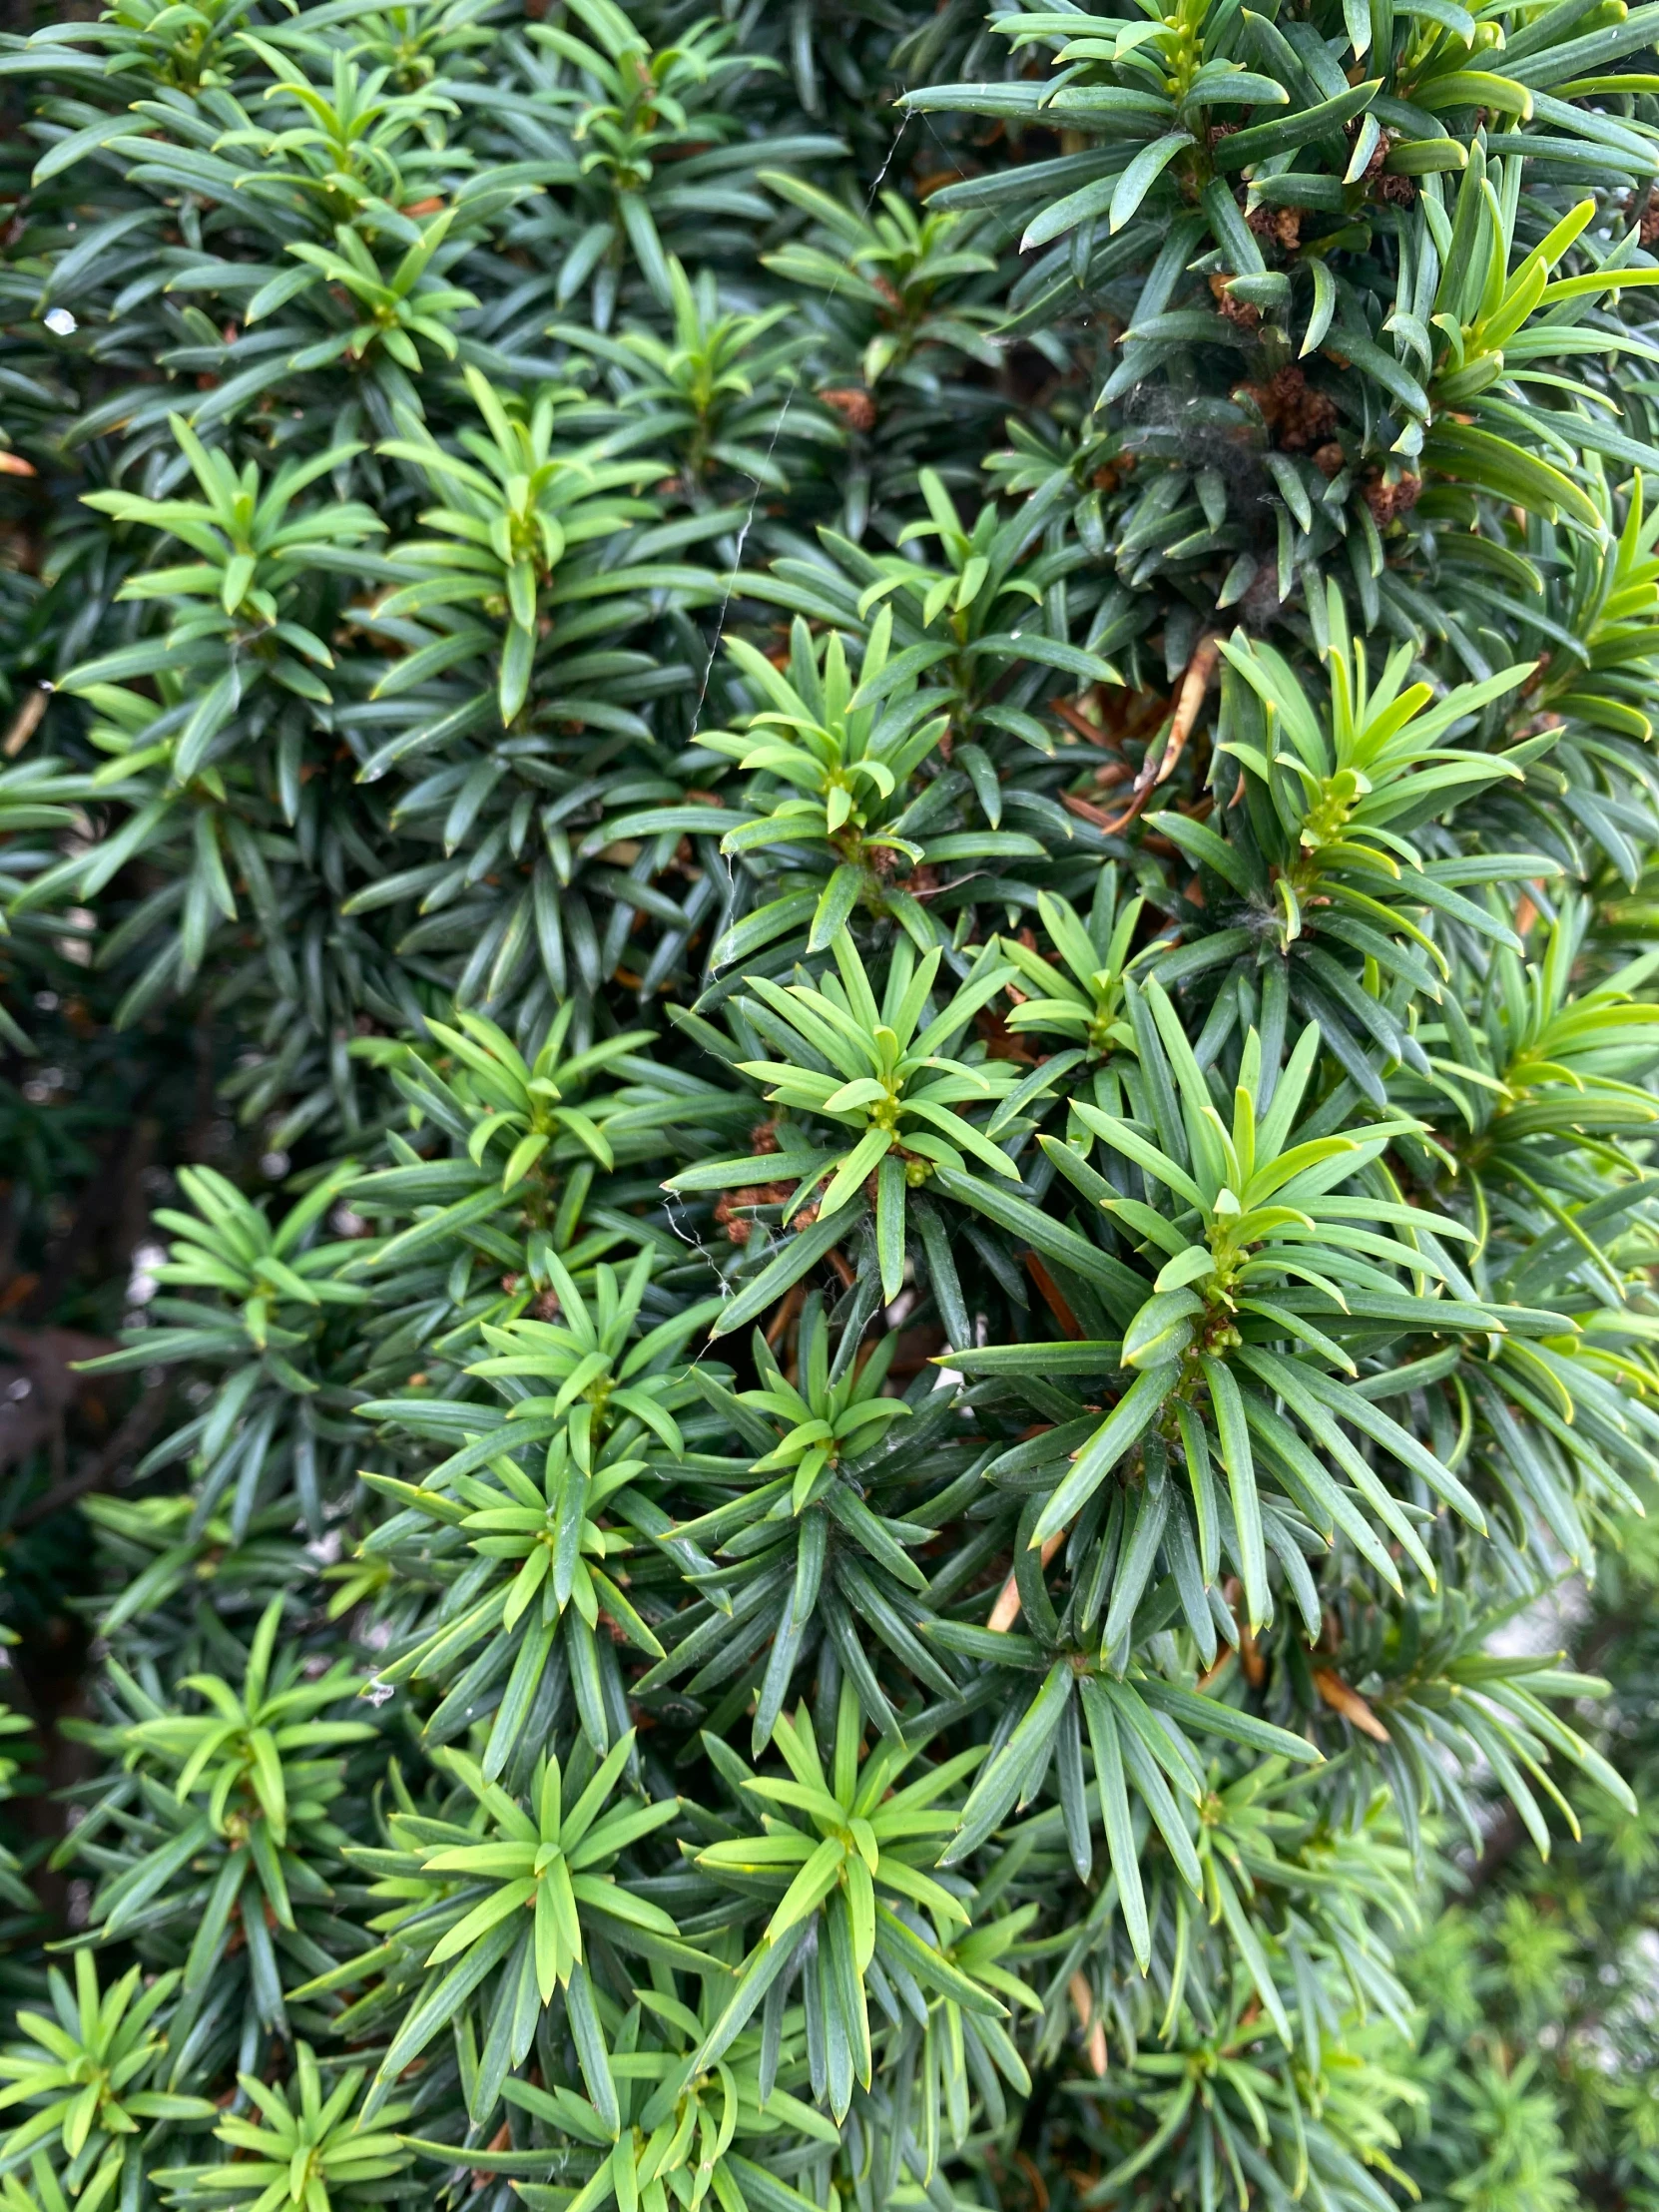 the green leaves of an evergreen tree